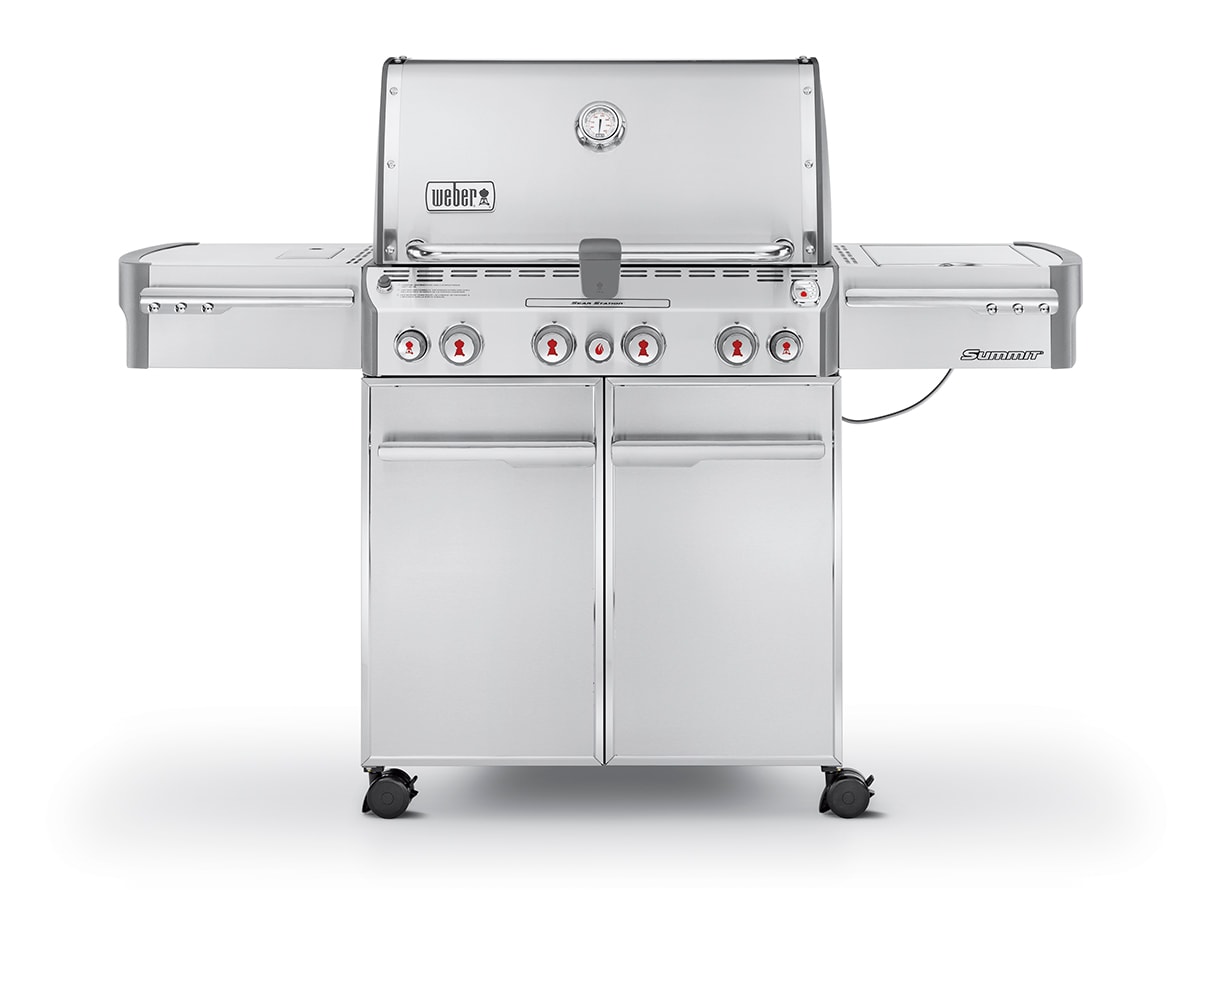 bur konstant Brutal Weber Summit S-470 4-Burner Liquid Propane Infrared Gas Grill with 1 Side  Burner with Integrated Smoker Box in the Gas Grills department at Lowes.com